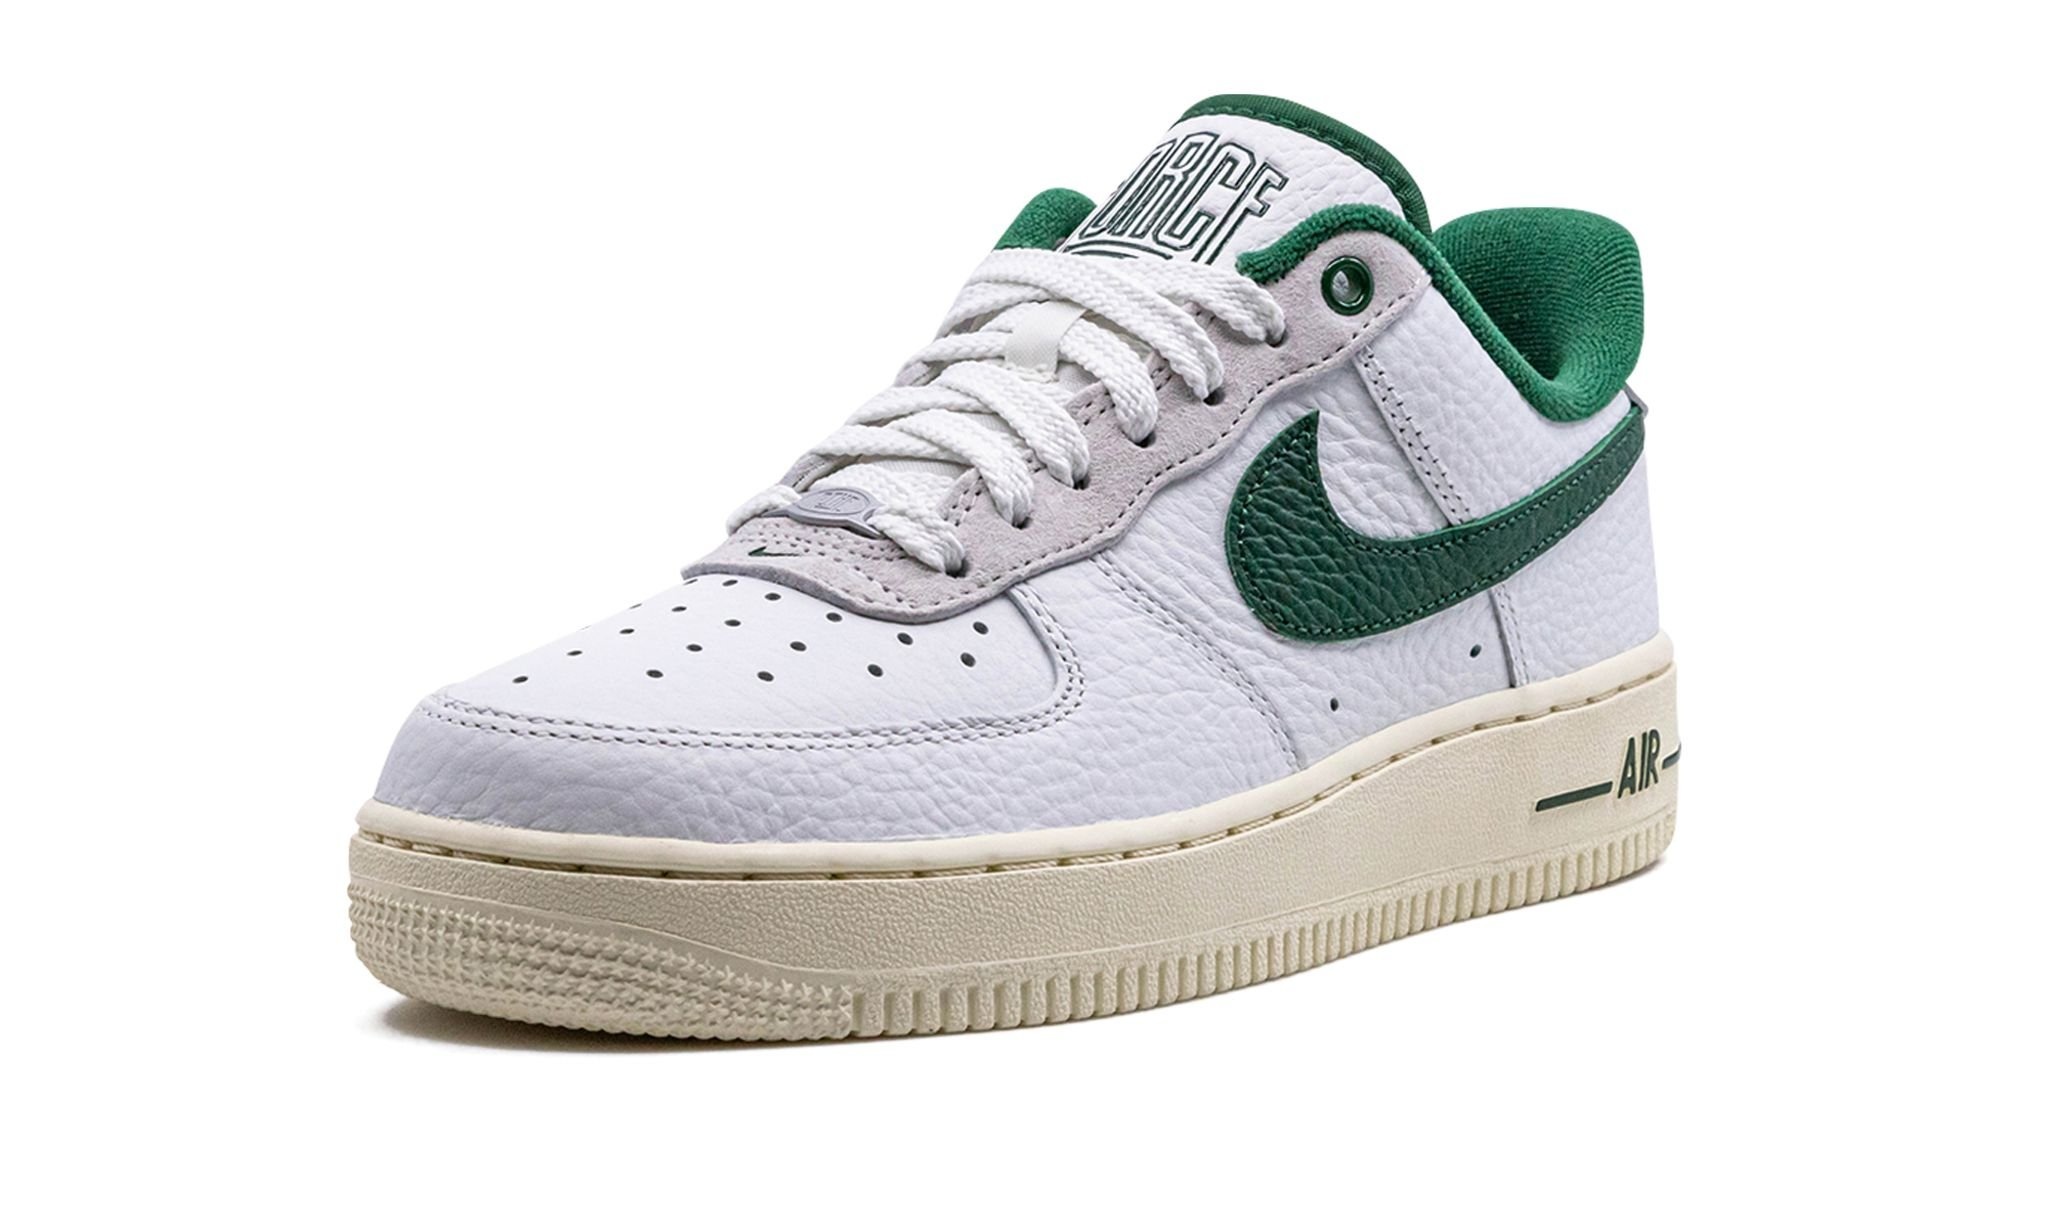 Nike Air Force 1 Low '07 LX WMNS "Command Force Gorge Green" - 4